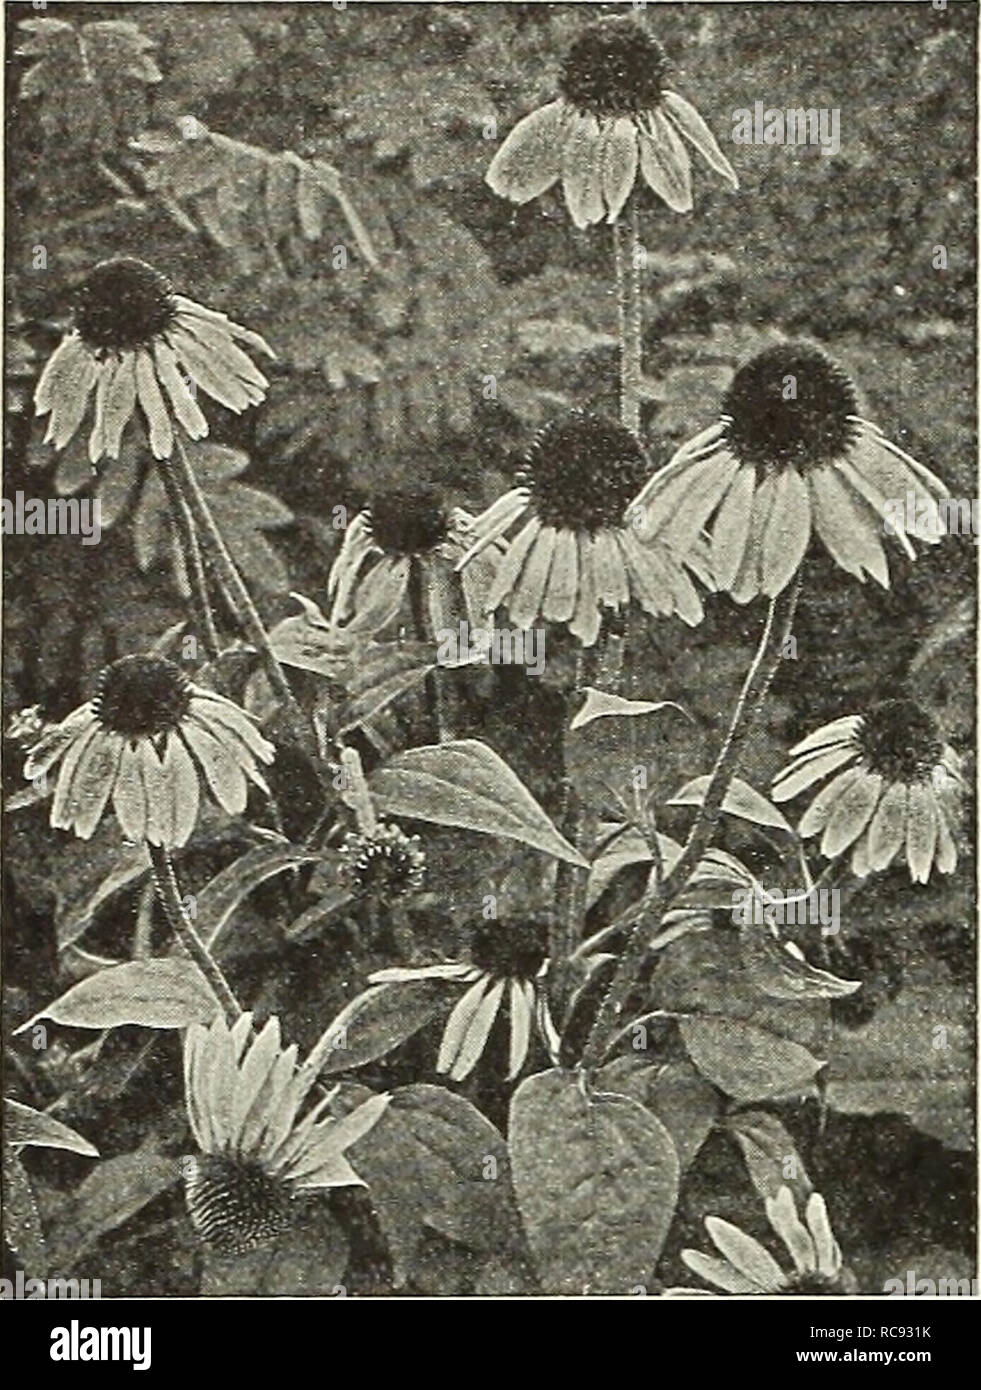 . Dreer's garden book 1931. Seeds Catalogs; Nursery stock Catalogs; Gardening Equipment and supplies Catalogs; Flowers Seeds Catalogs; Vegetables Seeds Catalogs; Fruit Seeds Catalogs. 194 ^flEHiyAJim^feVi,^^jM!&gt;5!i!rM«!Jfef?lirPH'M^. RuDBECKiA Purpurea (Giant Purple Cone-Flower) Rudbeckia (Cone-Aower) Indispensable plants for the hardy border, grow and thrive anywhere, giving a wealth of bloom, which are well suited for cutting. Golden Globe. An improved globular form of the popular Golden Glow with large double golden yellow flowers, not unlike a Pompon Dahlia. 5 feet; July to September. G Stock Photo